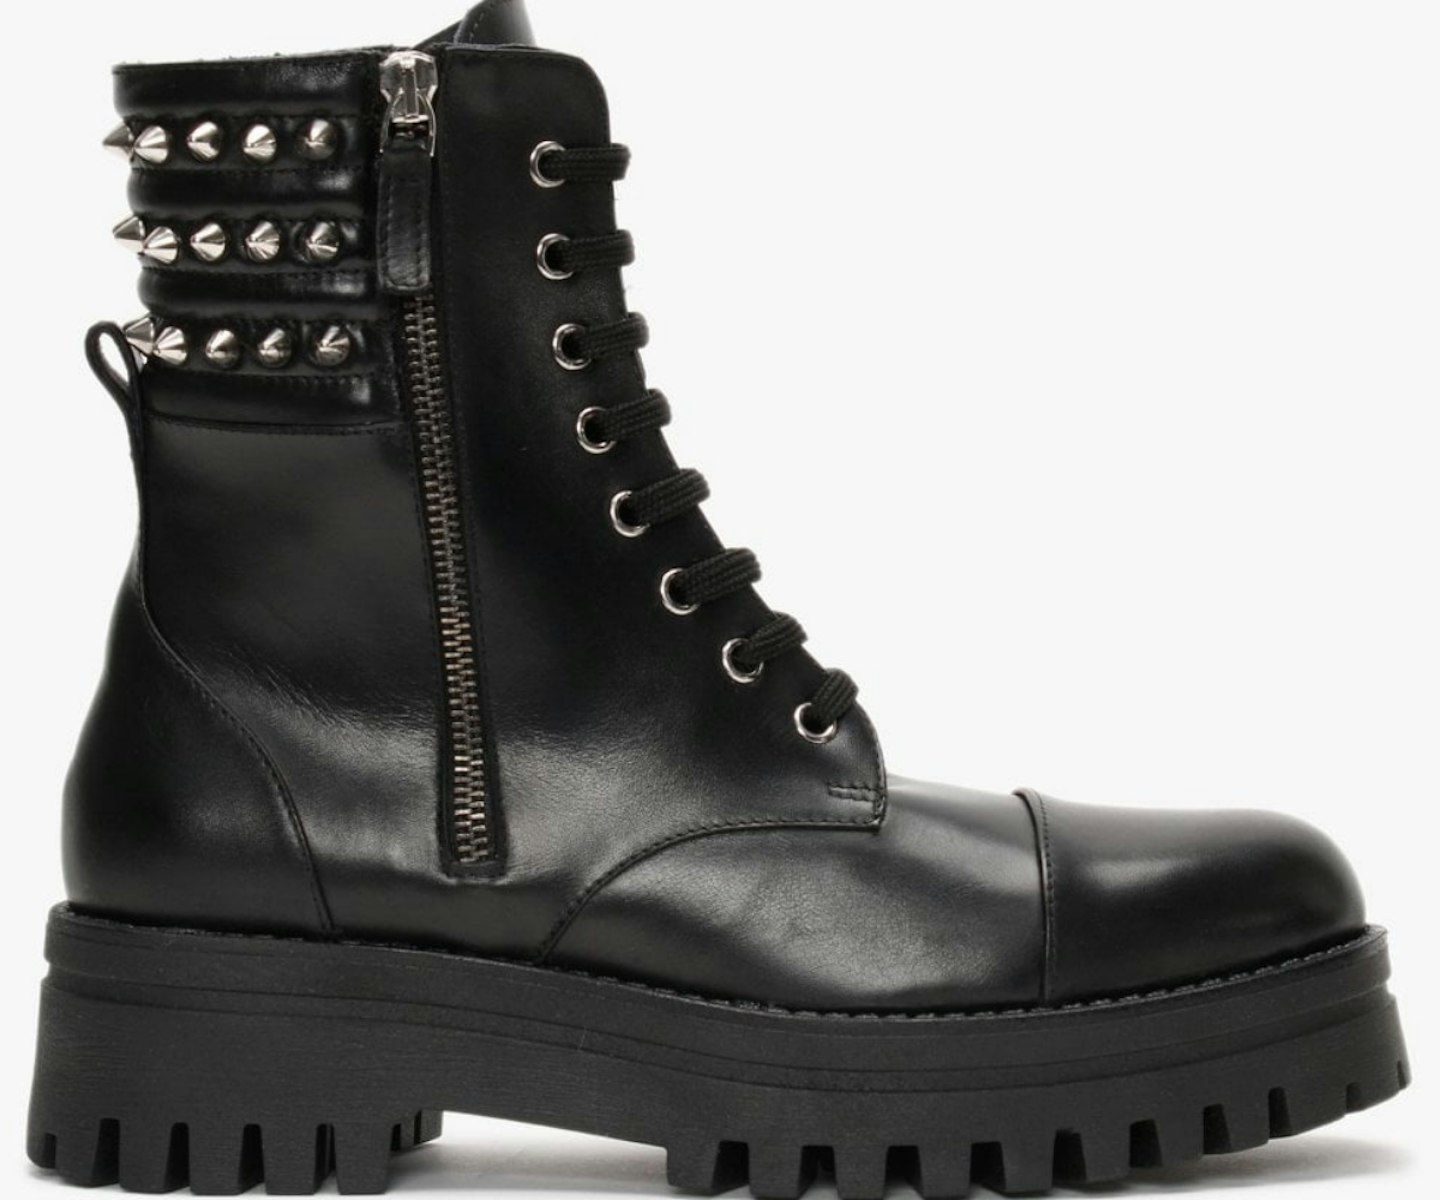 Fudder Black Leather Studded Collar Ankle Boots